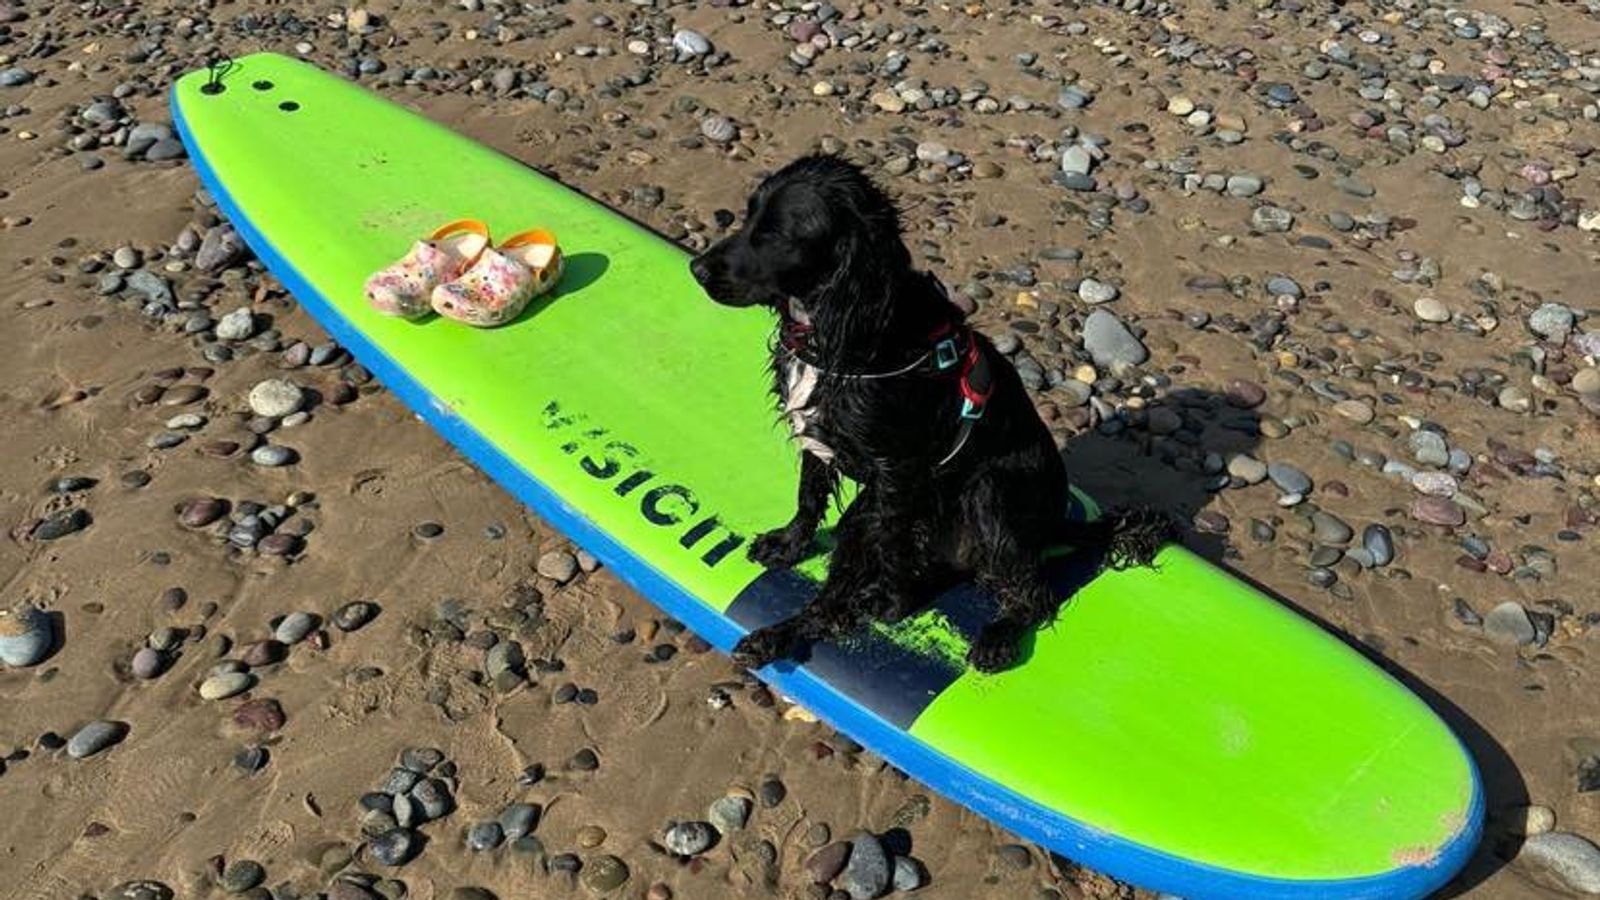 Ariel has been paddle-boarding since moving into her new home. Pic: Ollie Bird